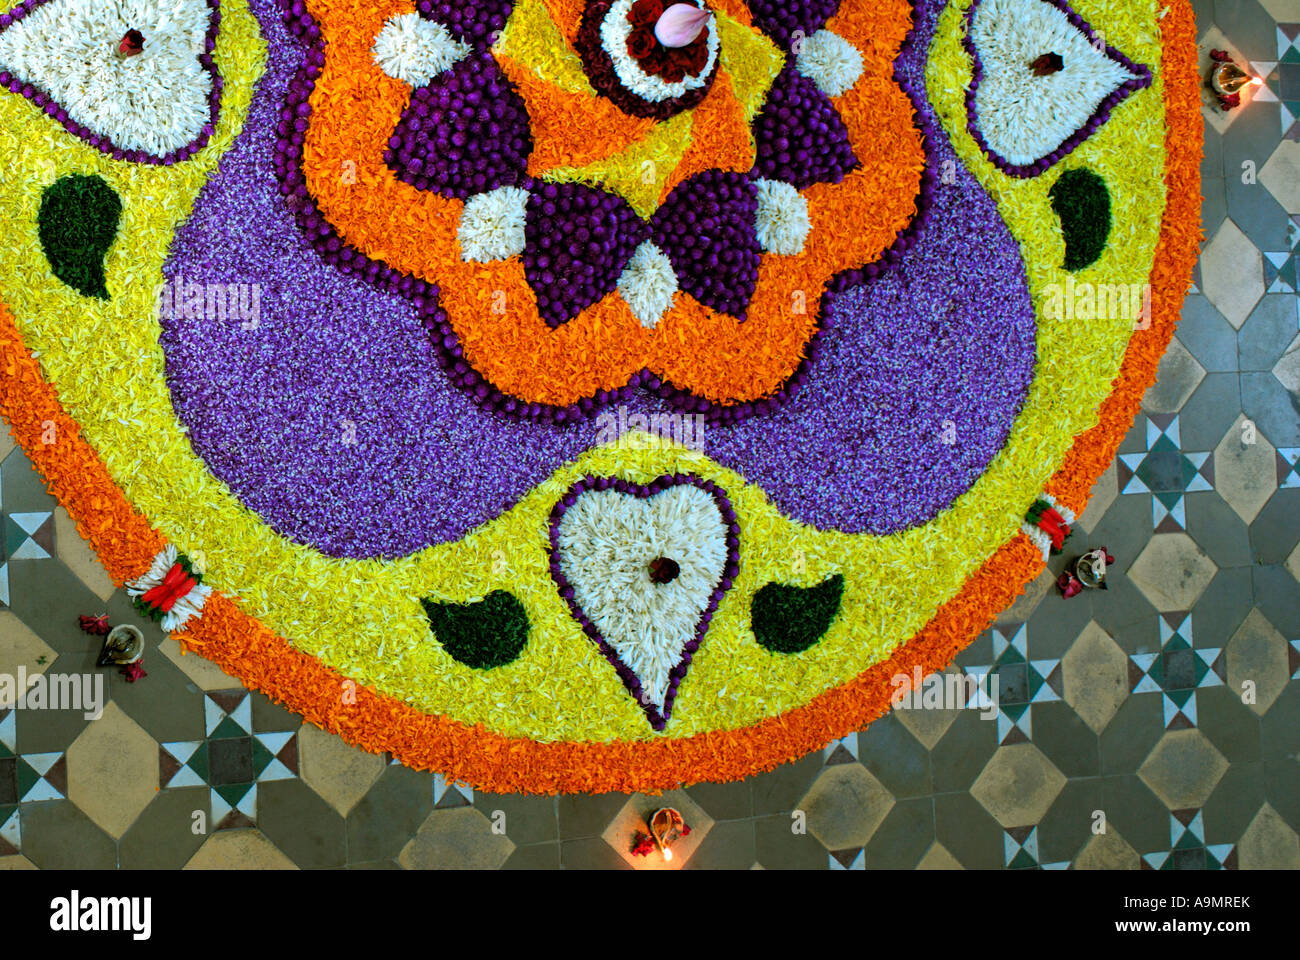 FLORAL DECORATIONS DURING ONAM IN KERALA Stock Photo